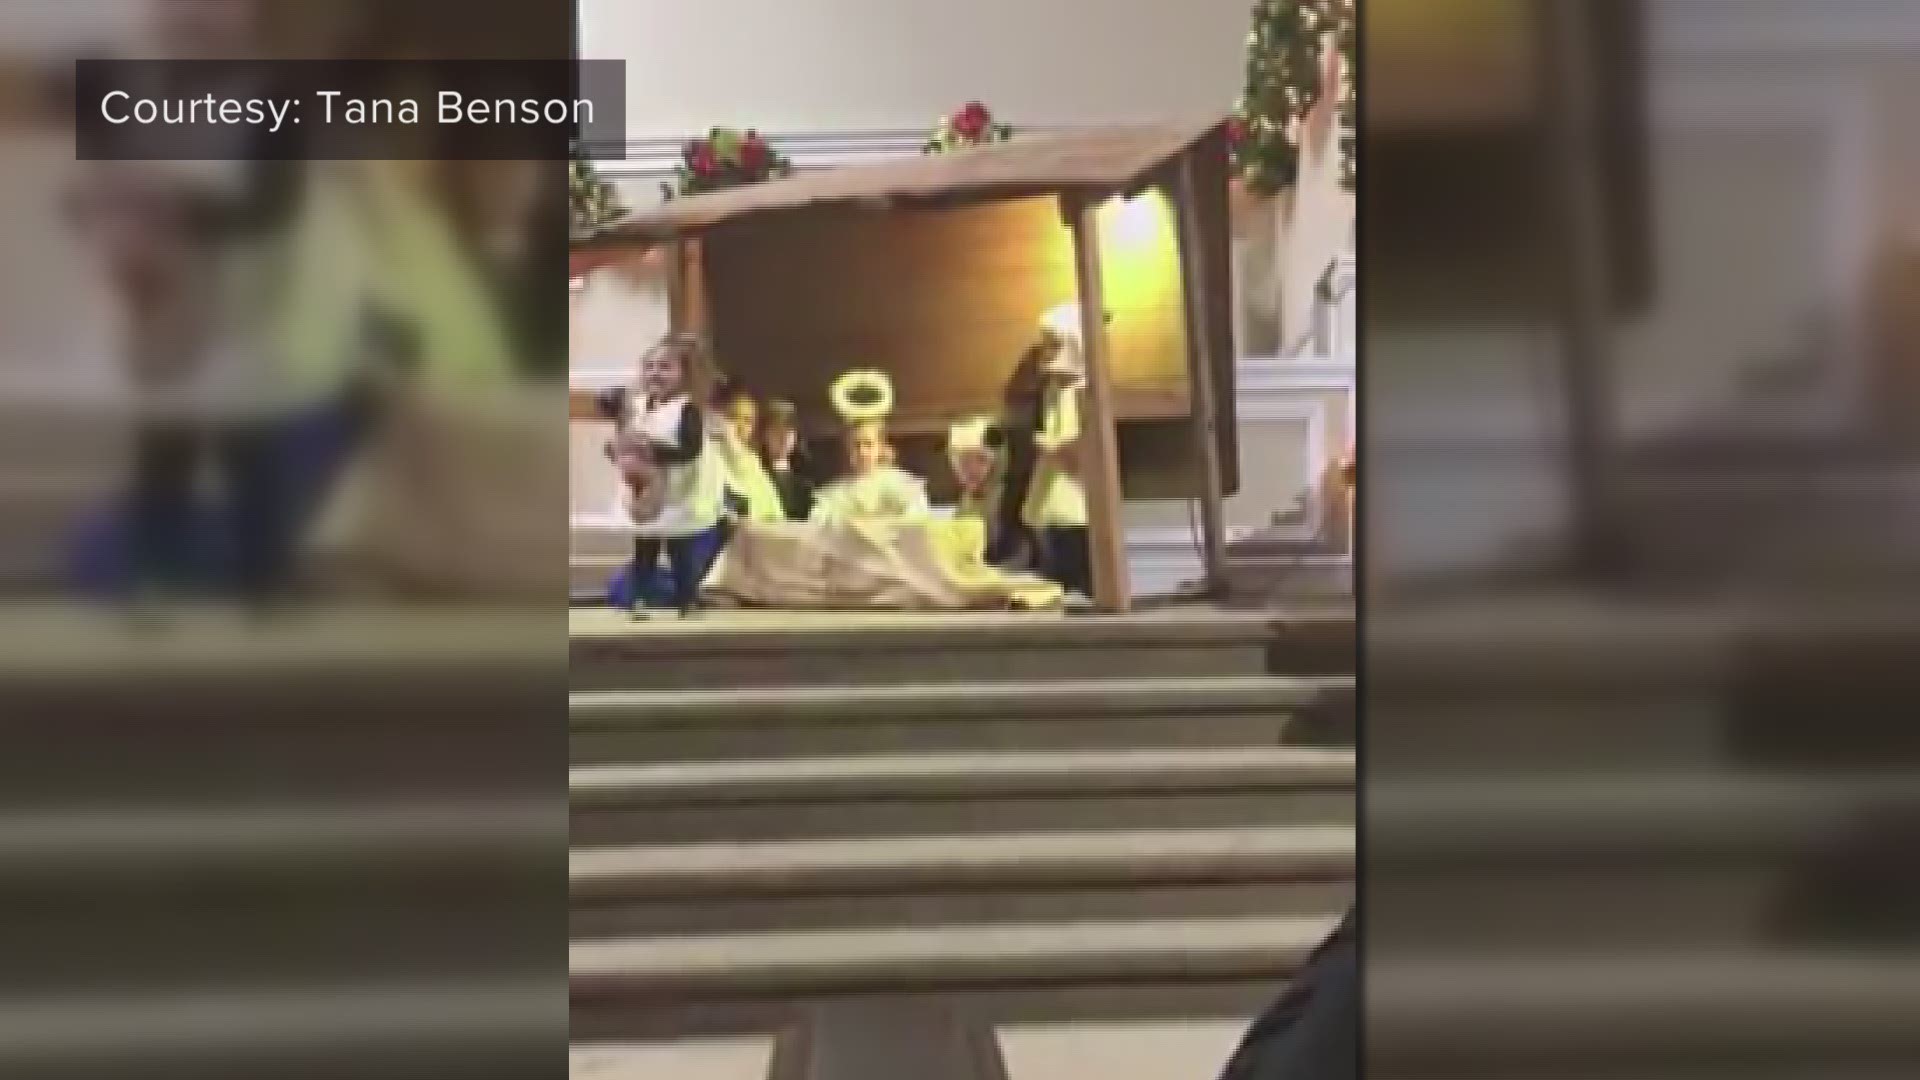 An East Tennessee congregation broke out into laughter when two kids started fighting over the baby Jesus doll during their Christmas pageant.